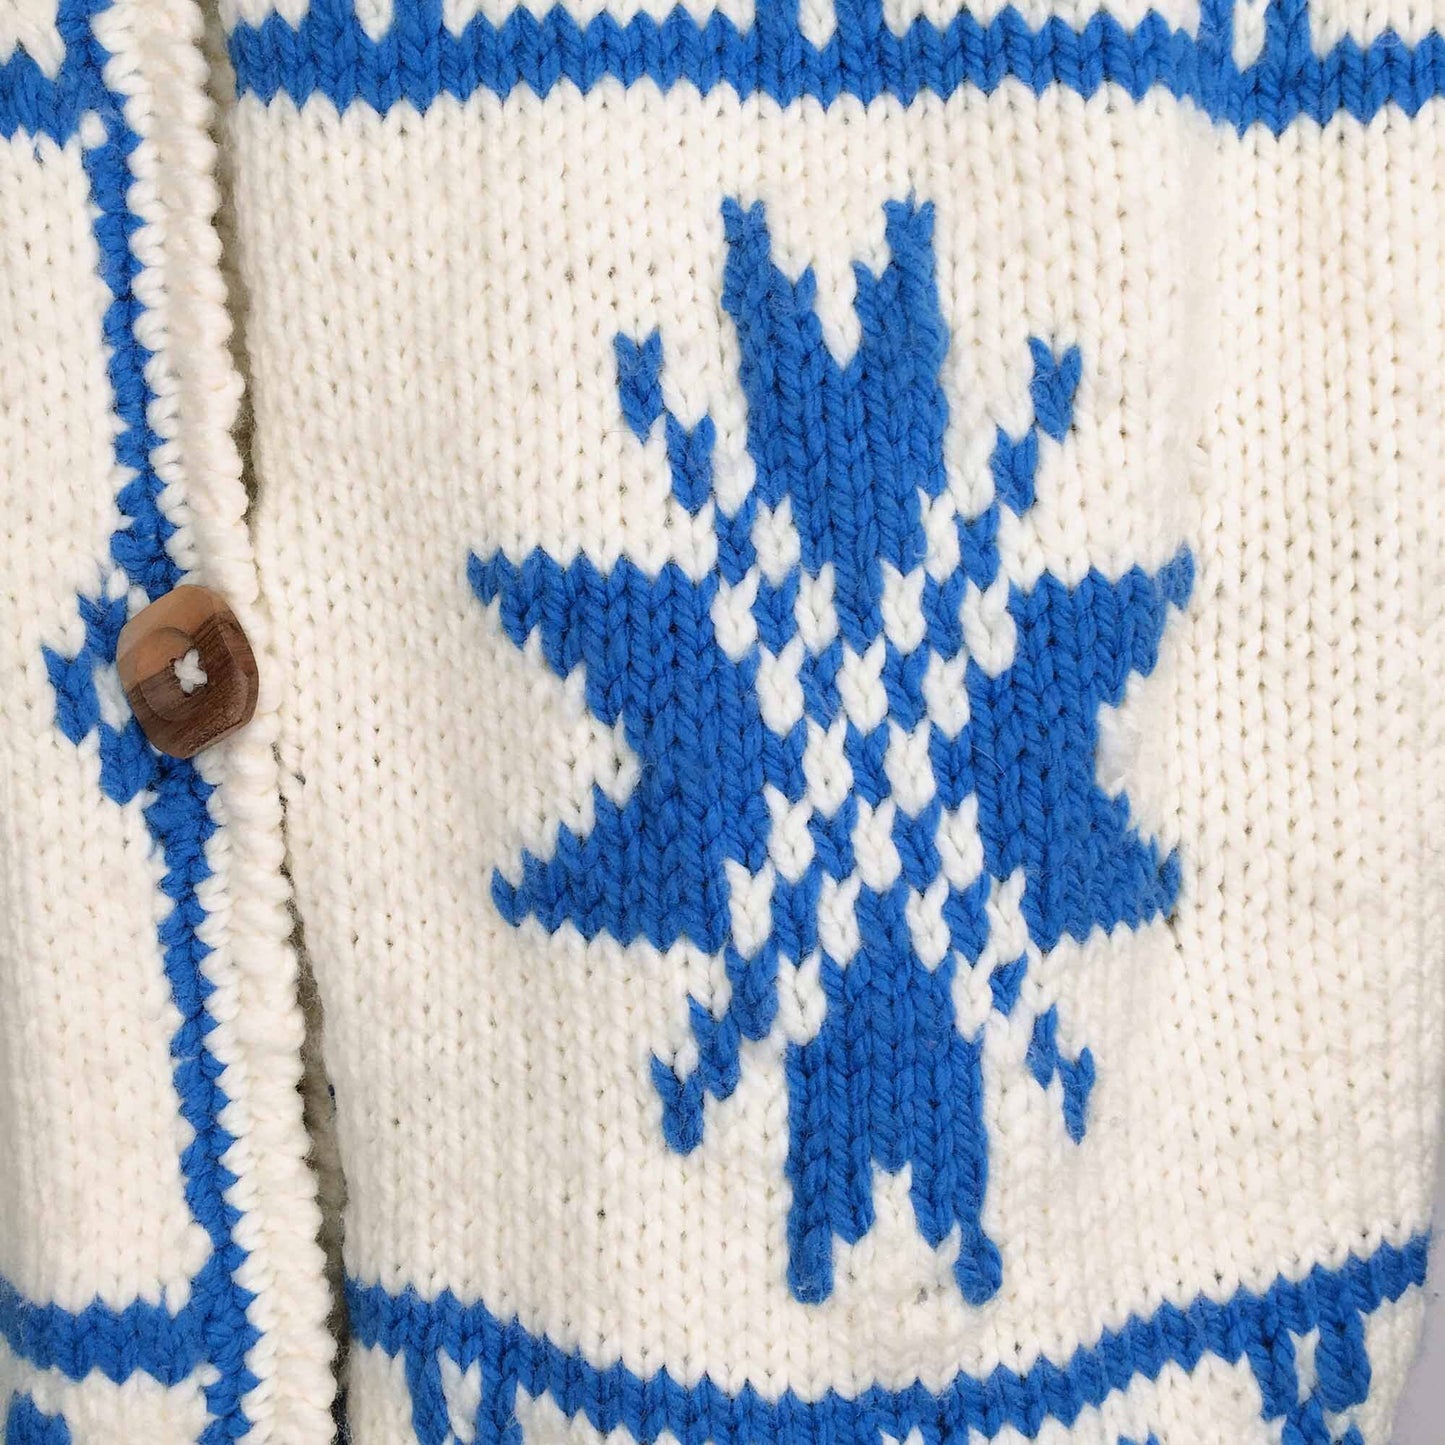 Vintage hand-knit wool nordic sweater jacket - OS